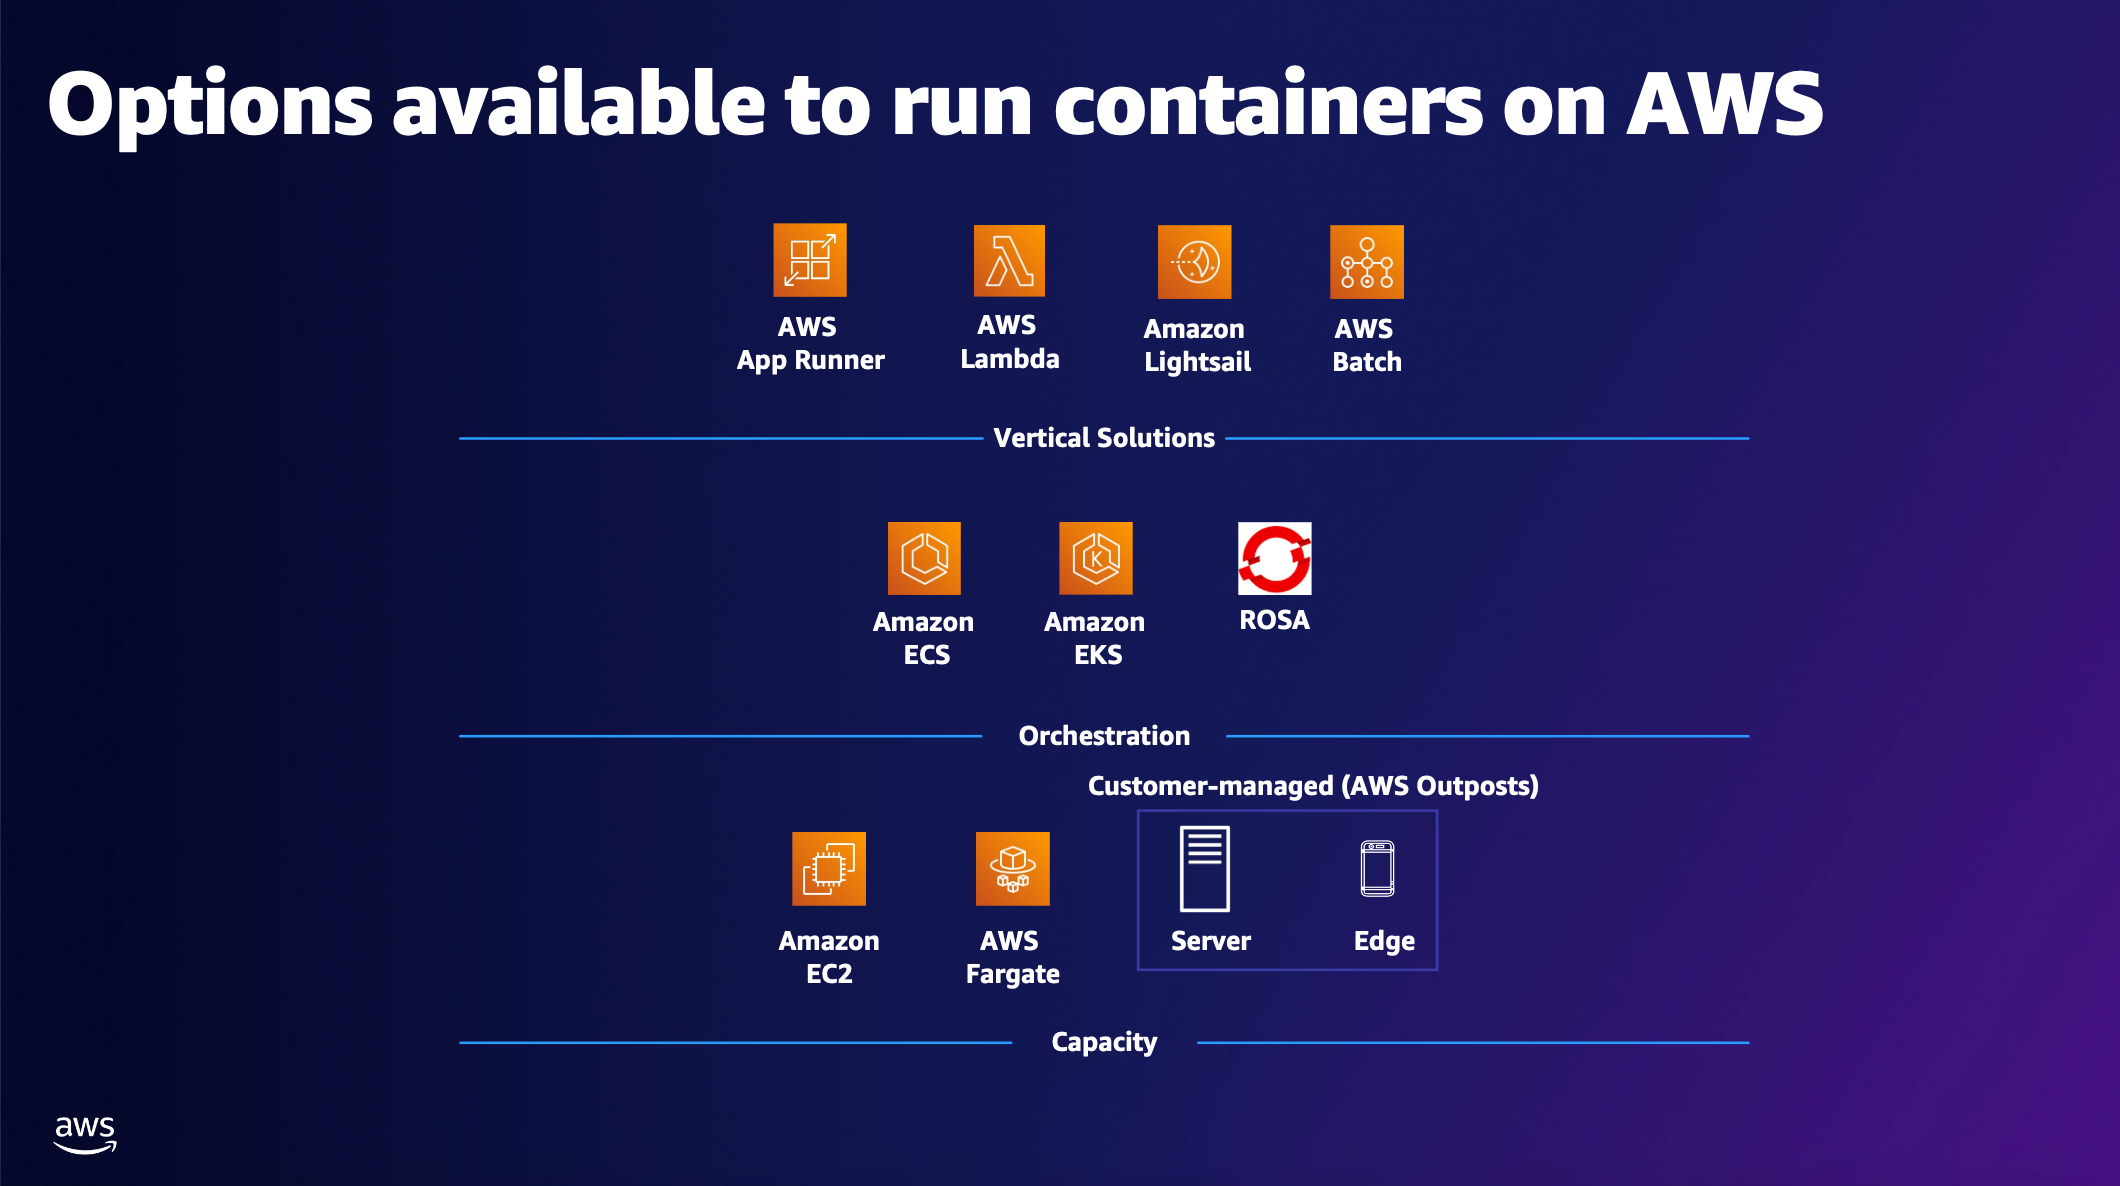 Diagram showing the options available for running containers on AWS